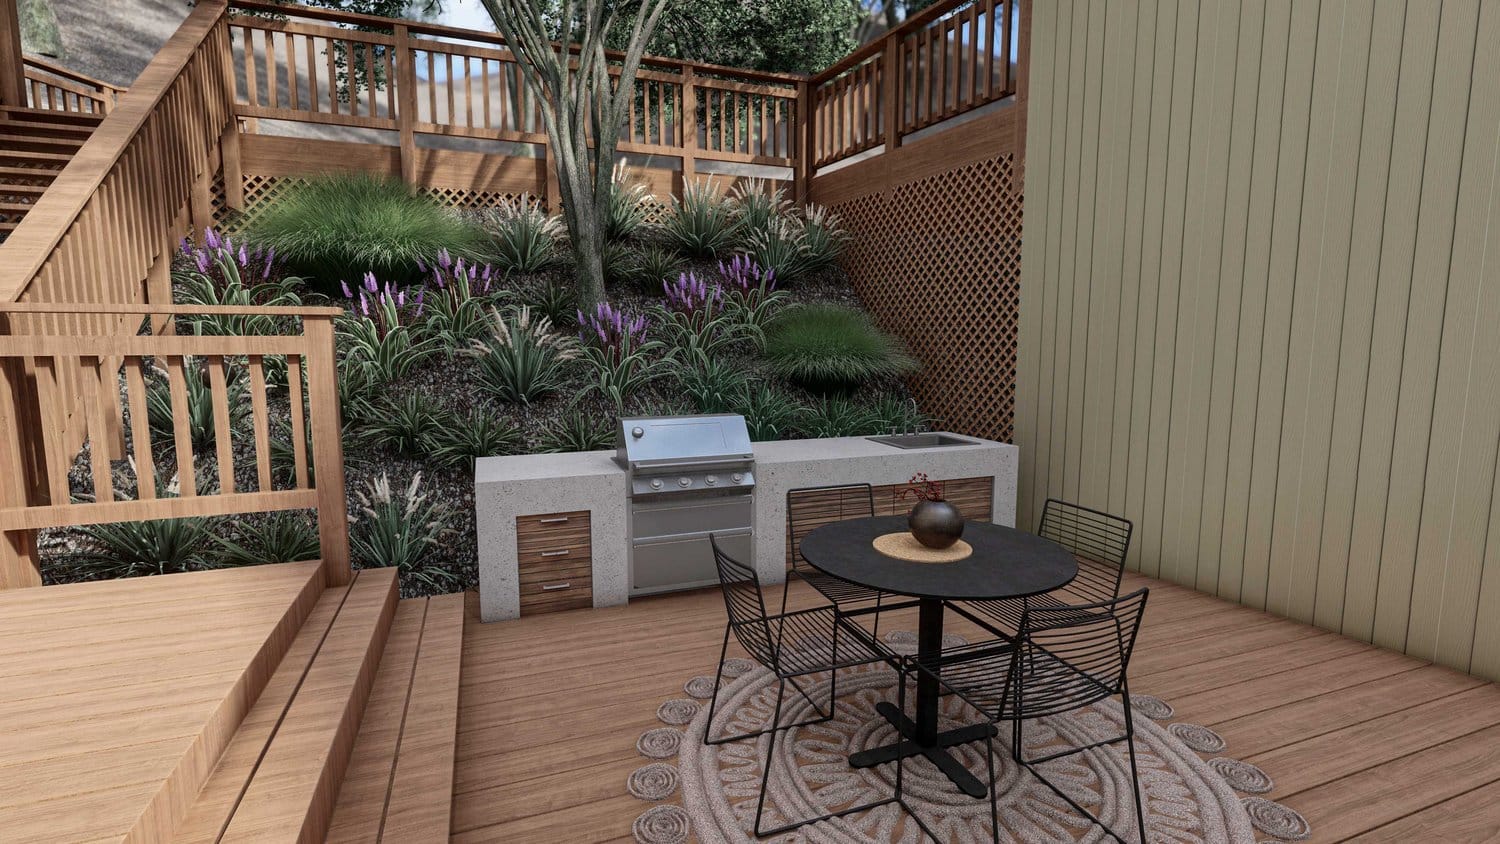 Mill Valley small backyard kitchen area with dining set and plants